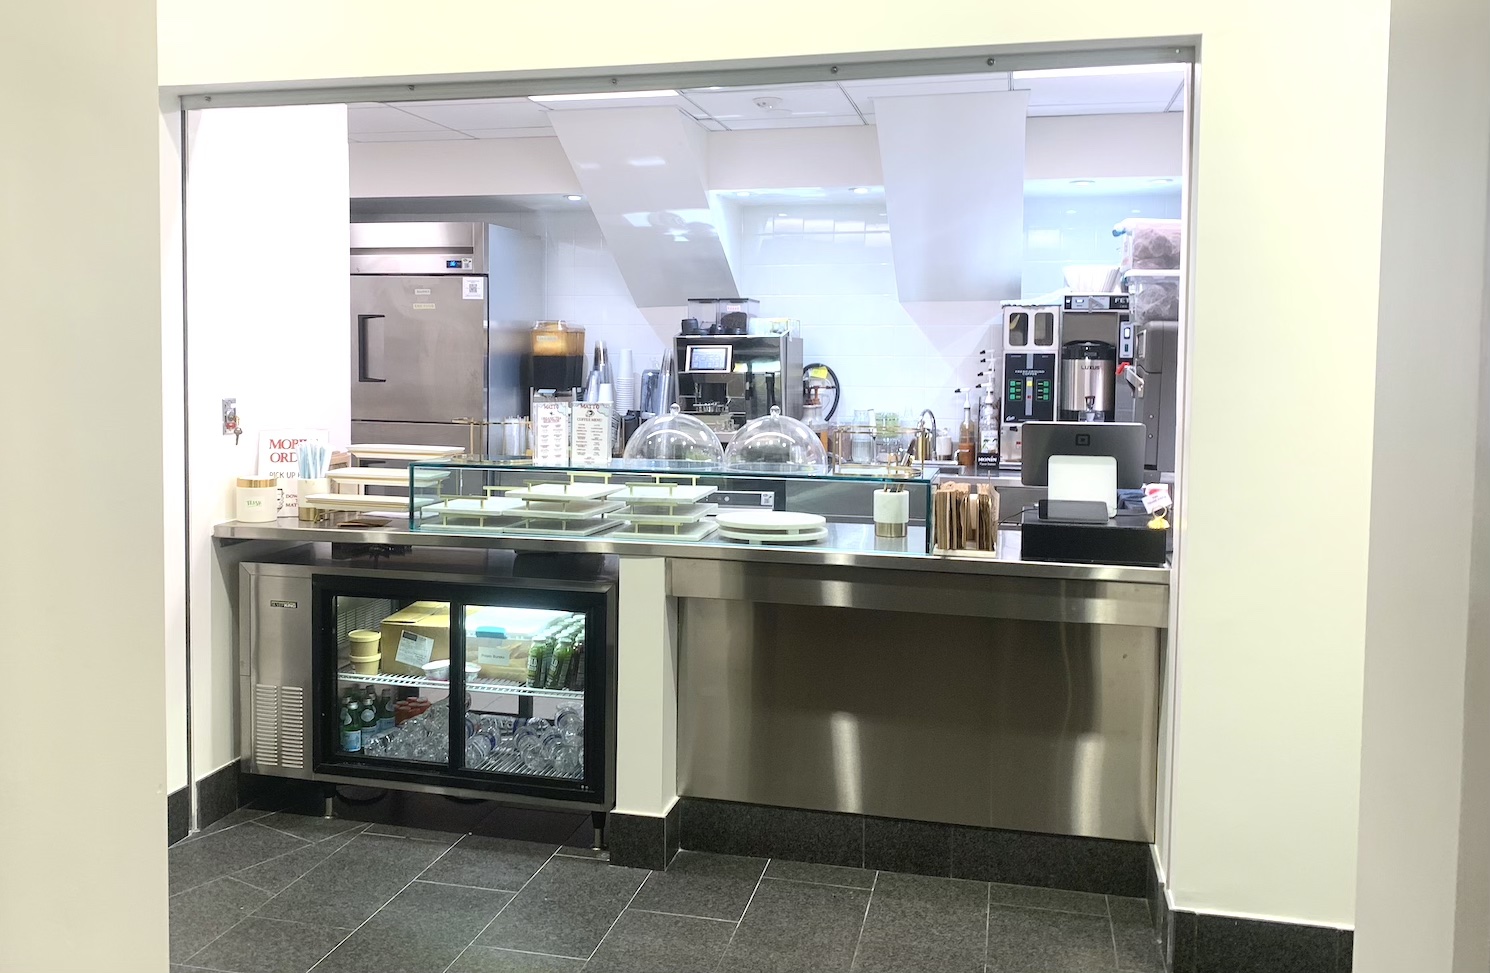 An indoor storefront with white walls, a silver metallic countertop, and a glass display case for pastries. Behind the countertop are a silver refrigerator, a coffee maker, and other equipment.